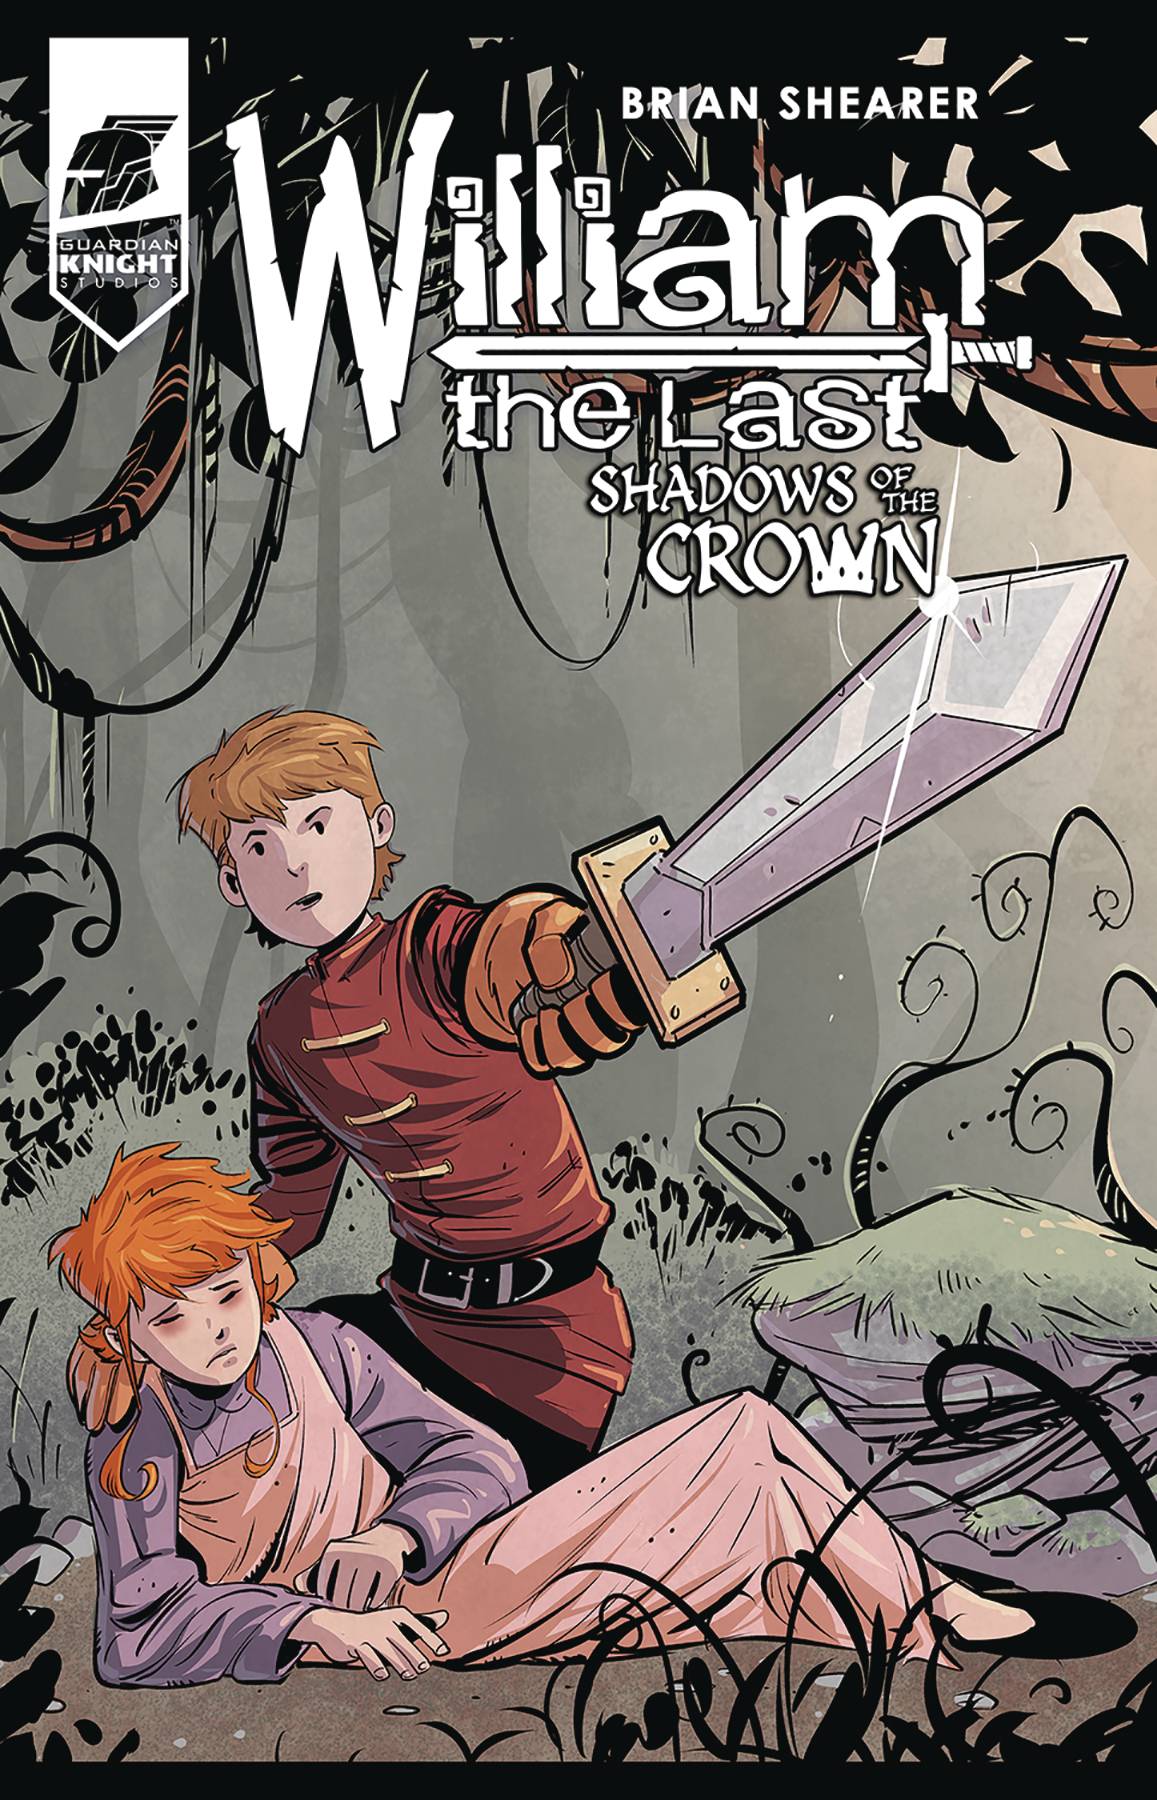 William the Last: Shadows of the Crown #3 (2019)